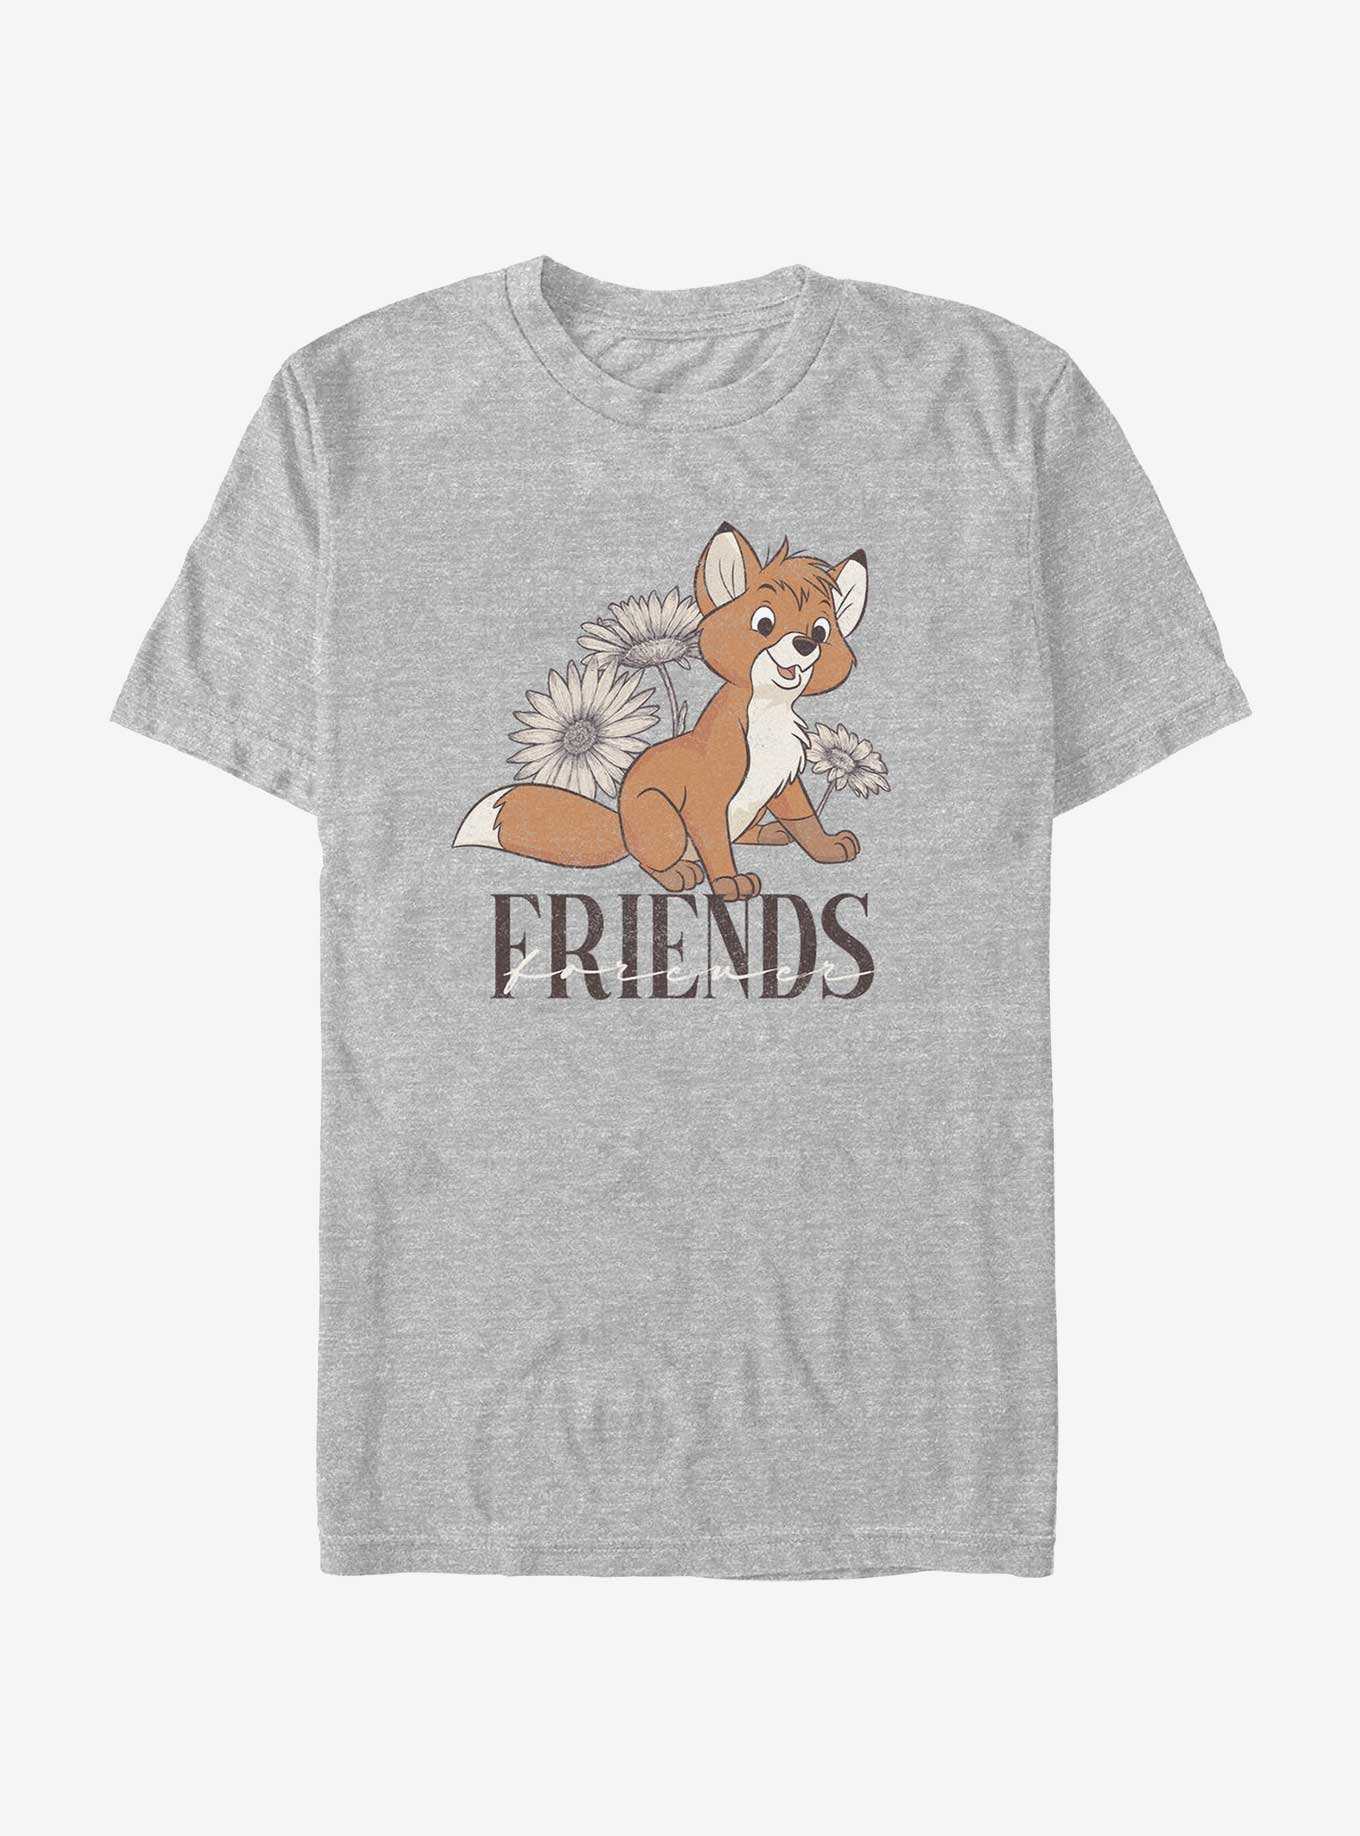 Disney The Fox and the Hound Tod Friends T-Shirt, , hi-res